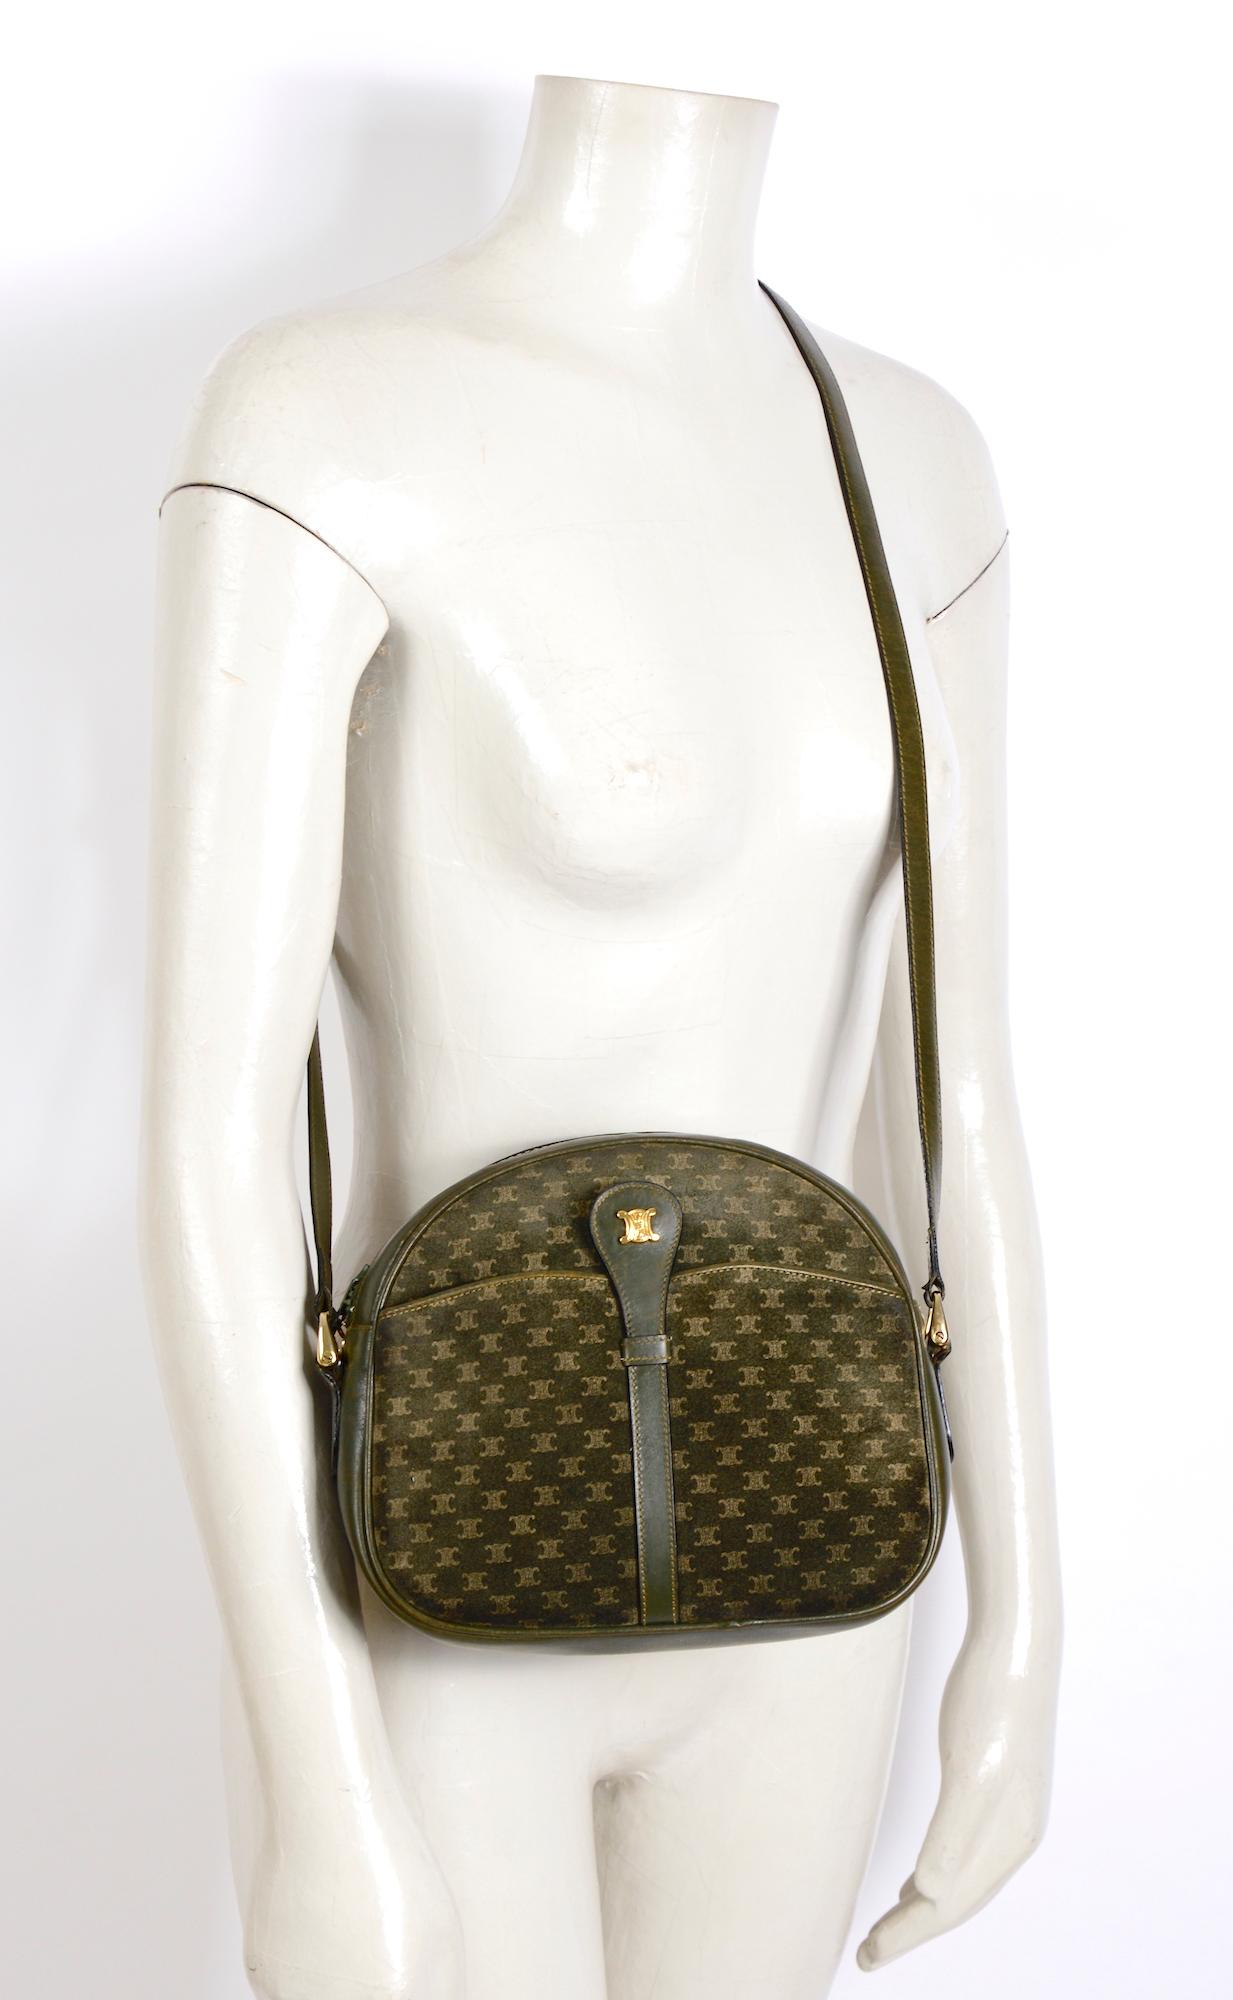 Vintage Celine hunter green trimmed with leather, suede crossbody bag.
This pre-owned bag has been well taken care of and aged beautifully, a few scratches here and there but no damage as you will find the corners in perfect condition.
One